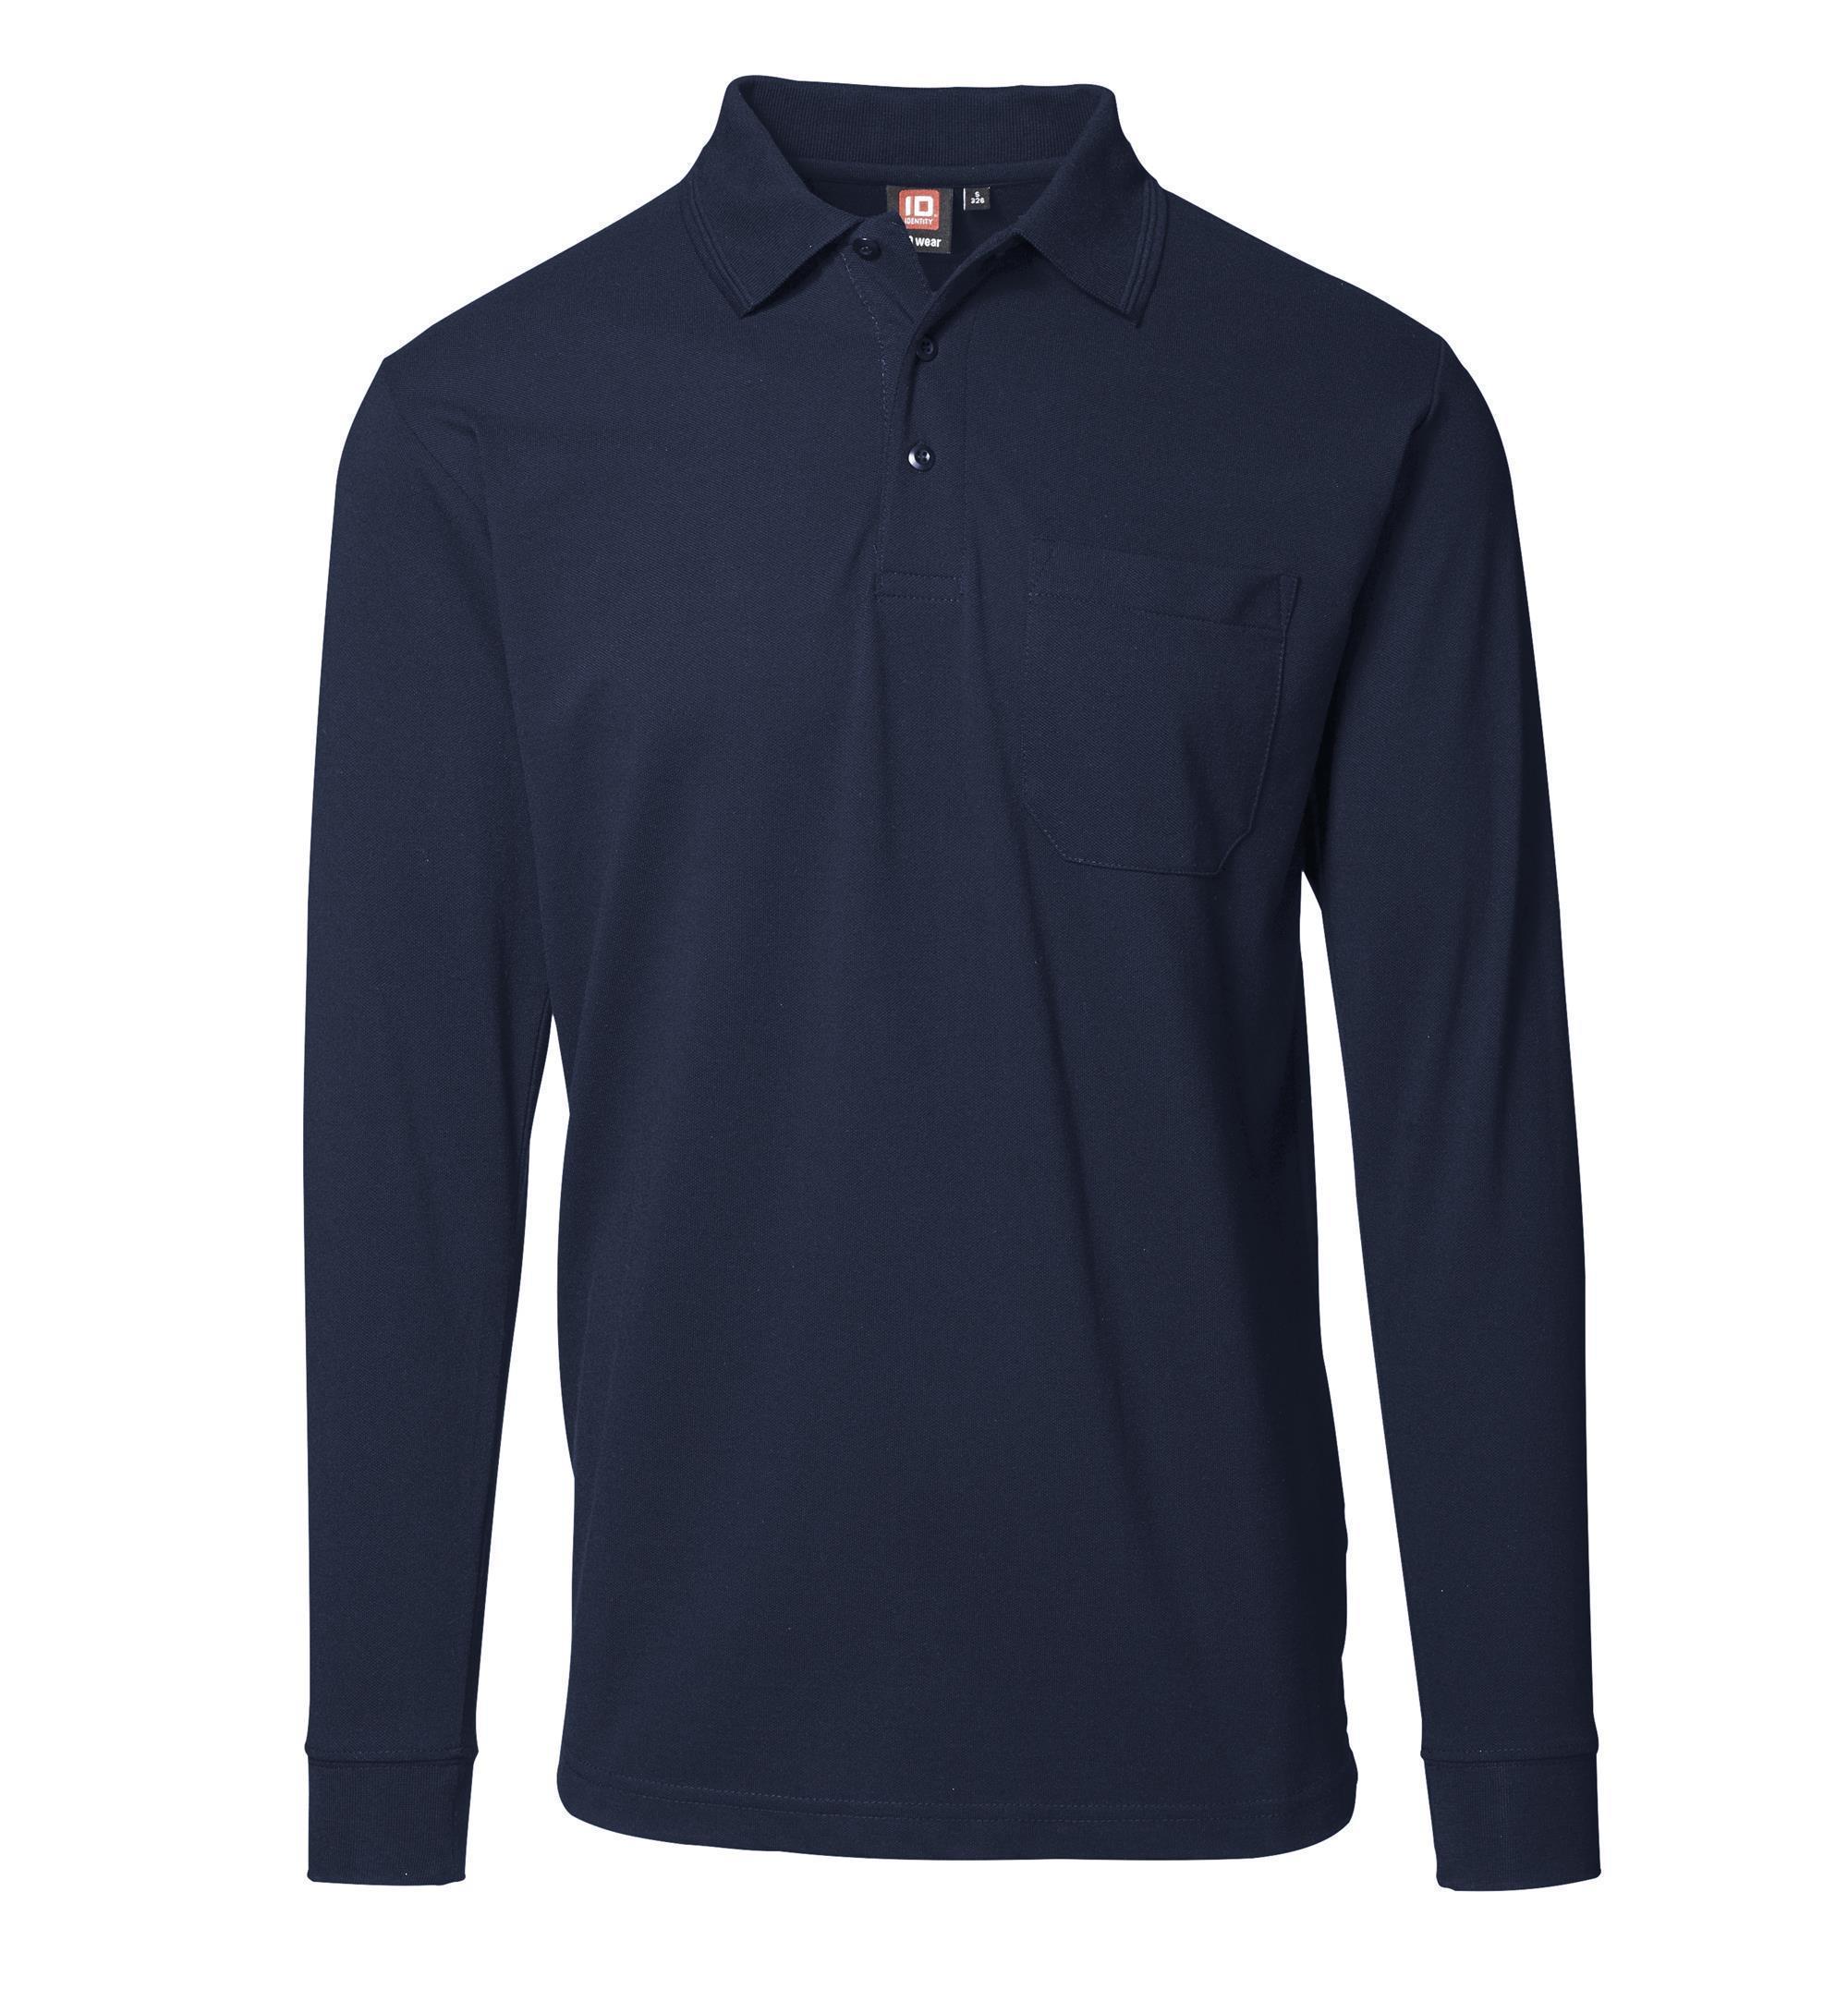 PRO Wear polo shirt long sleeve with chest pocket 210-220 g/m² ID Identity® Navy XL